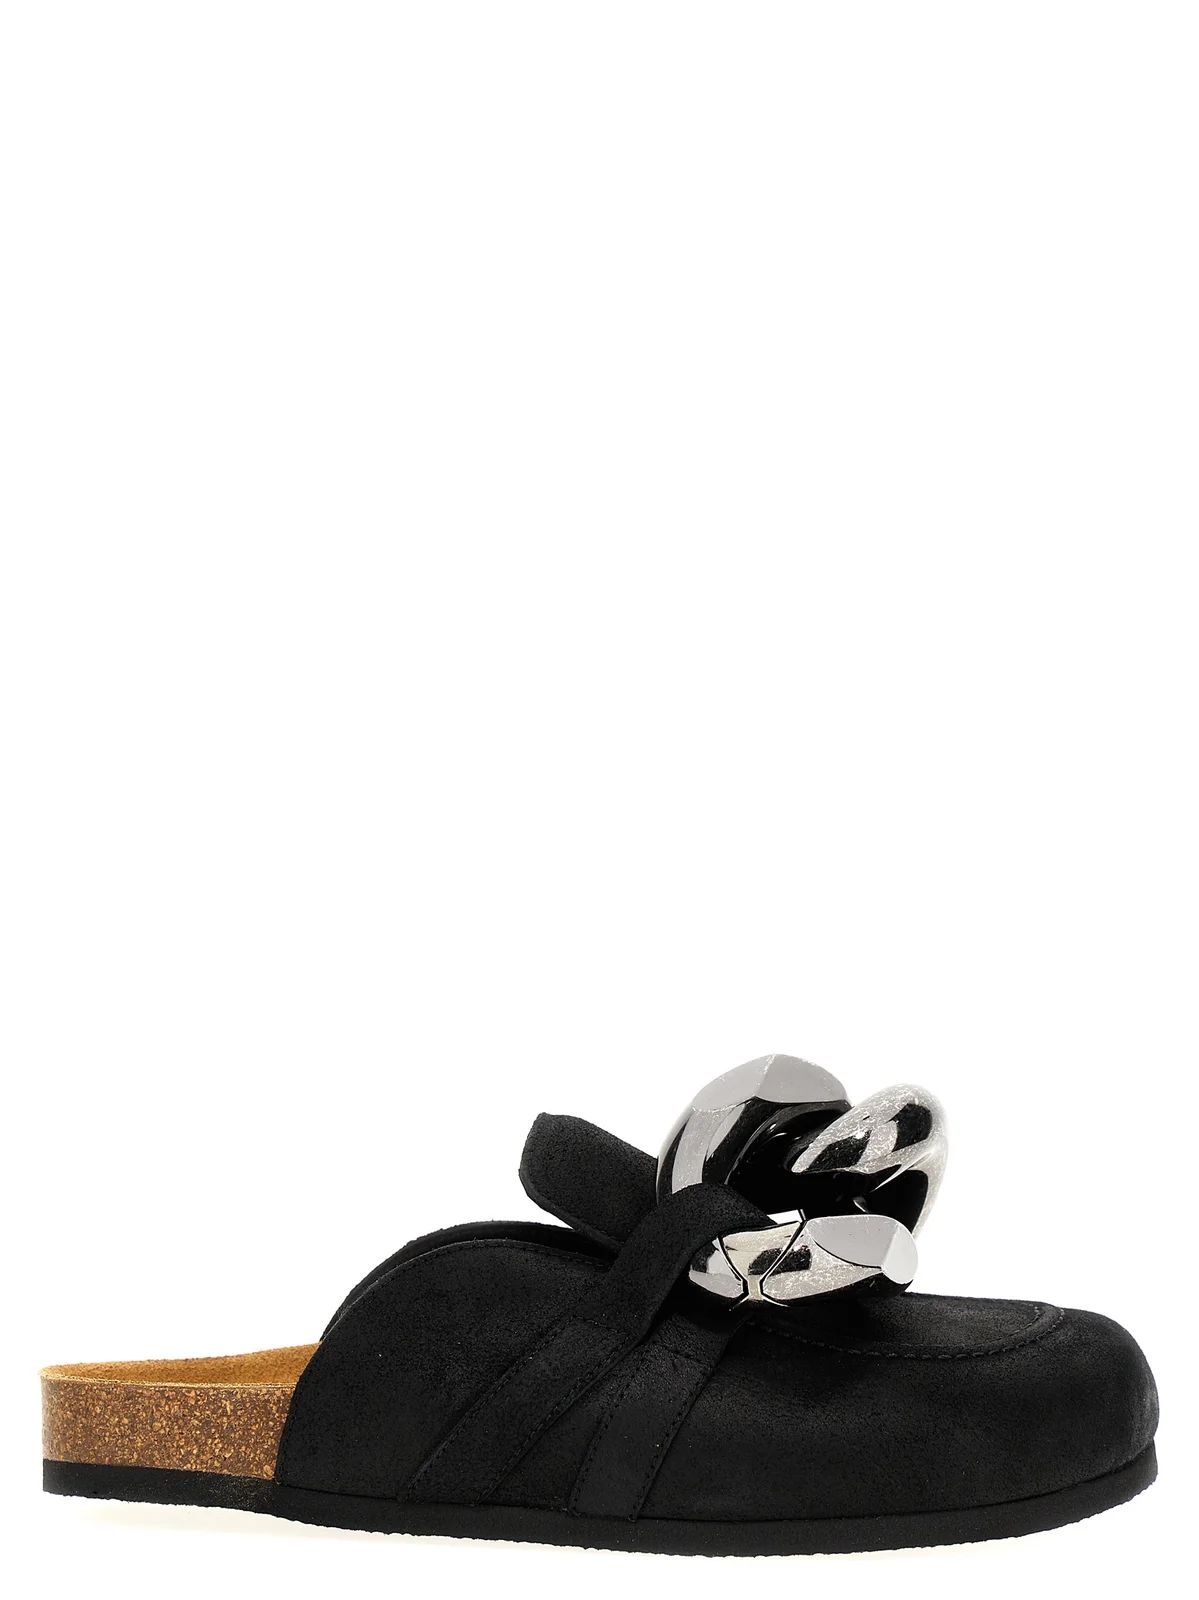 JW Anderson Chain-Detailed Mules | Cettire Global